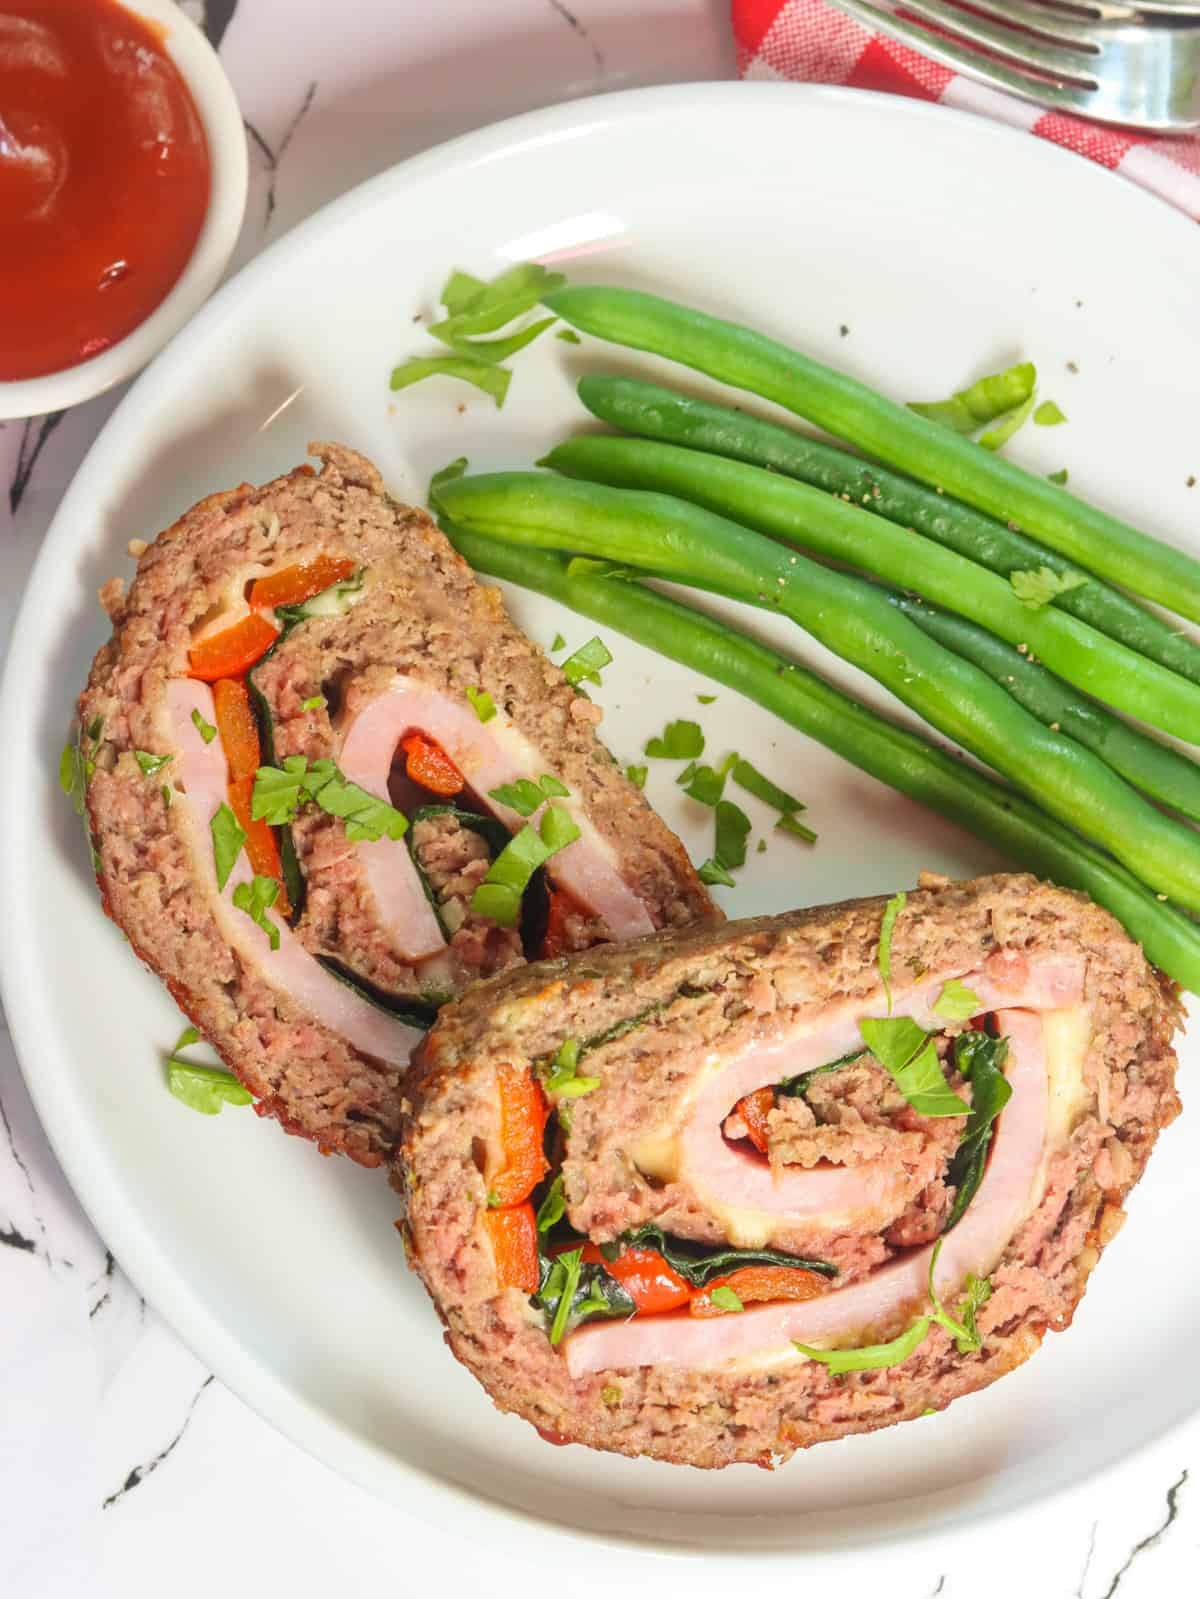 Enjoy stuffed meatloaf with roasted green beans